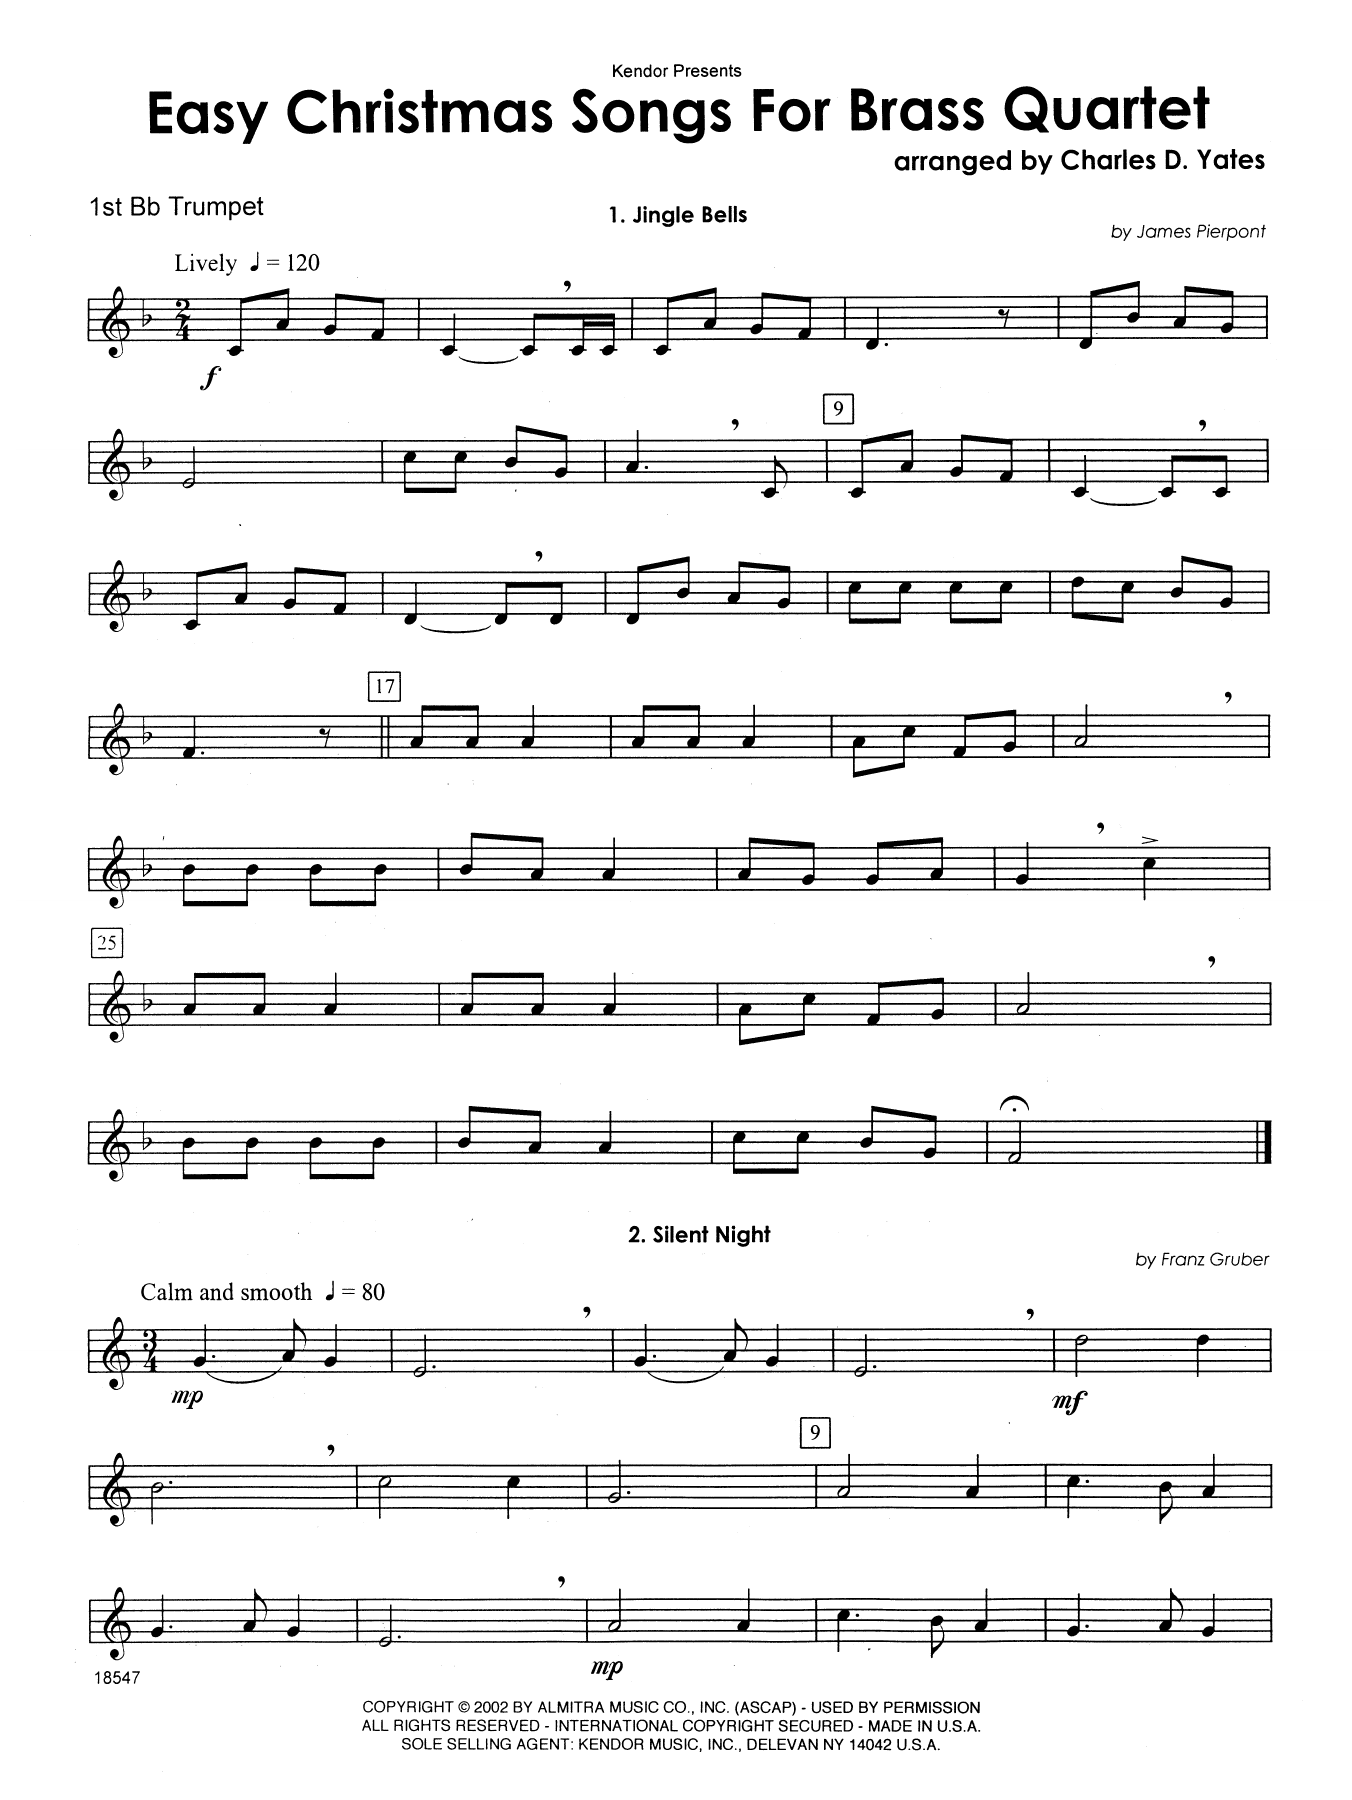 Download Charles D. Yates Easy Christmas Songs For Brass Quartet Sheet Music